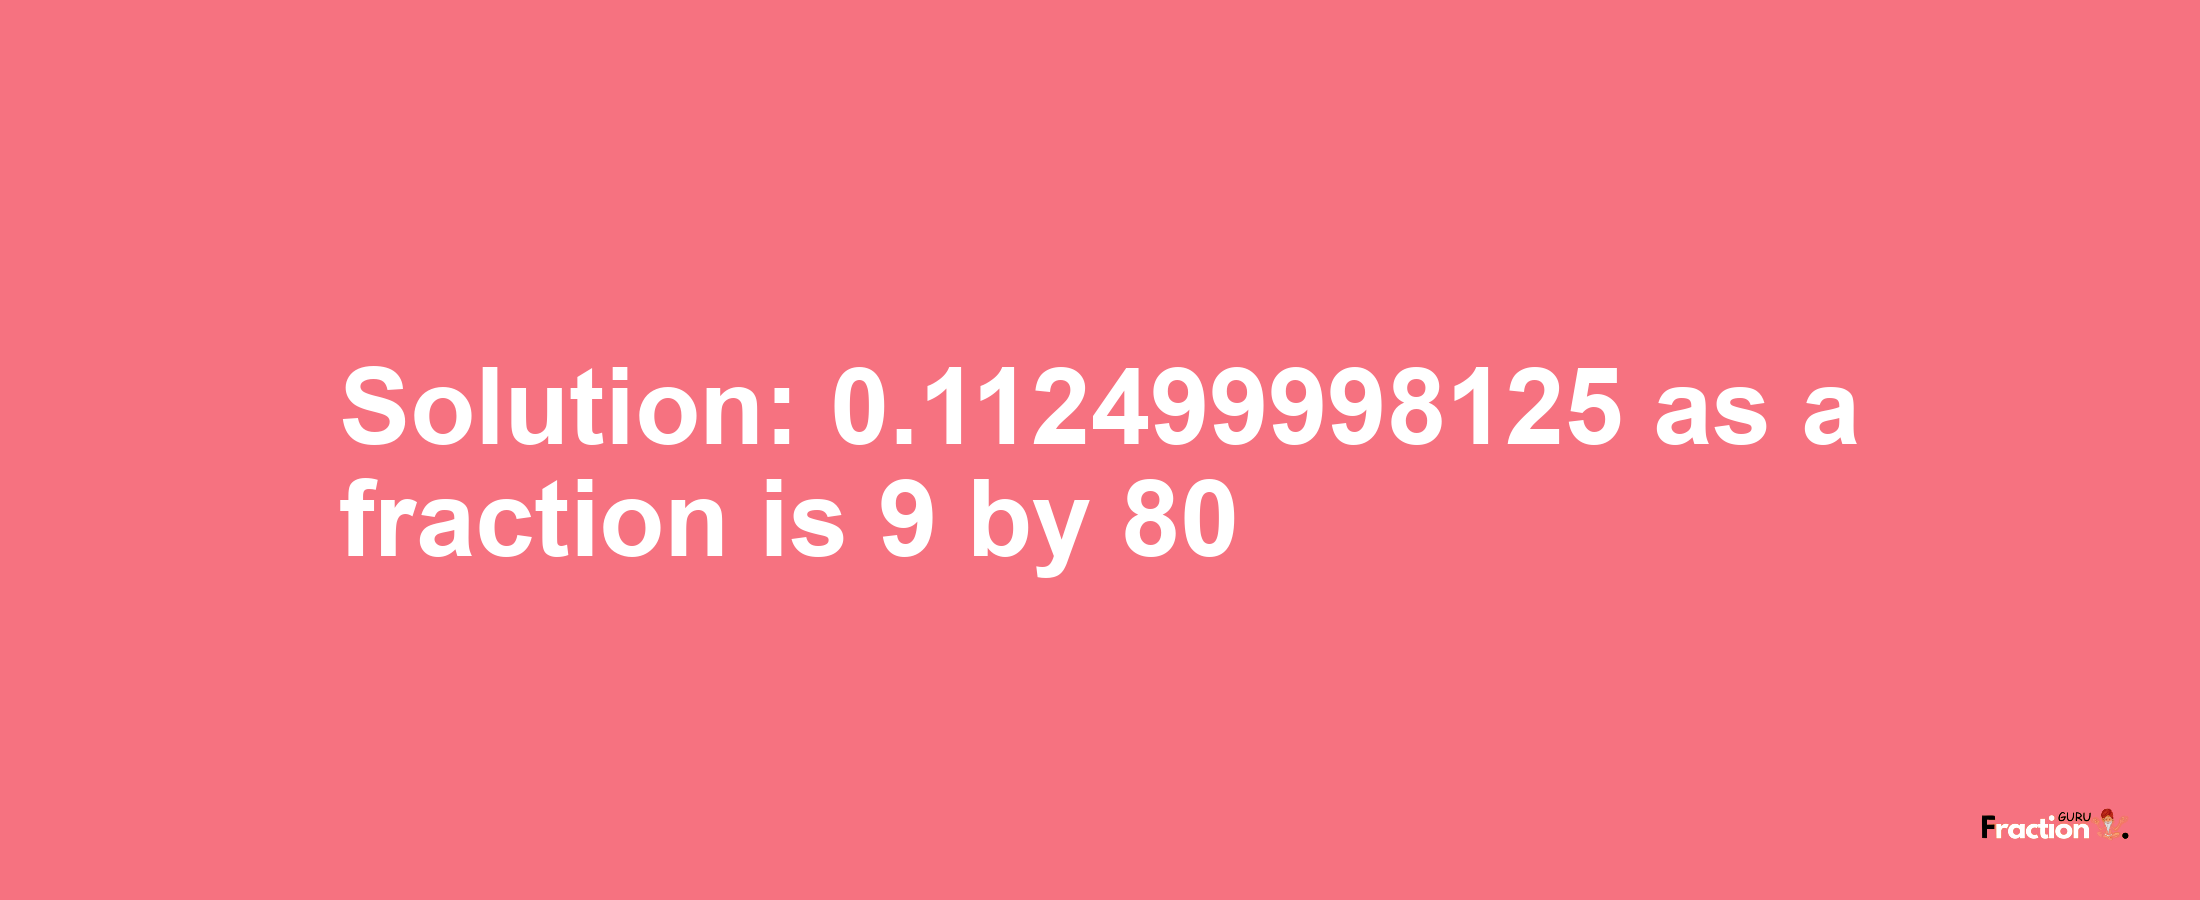 Solution:0.112499998125 as a fraction is 9/80